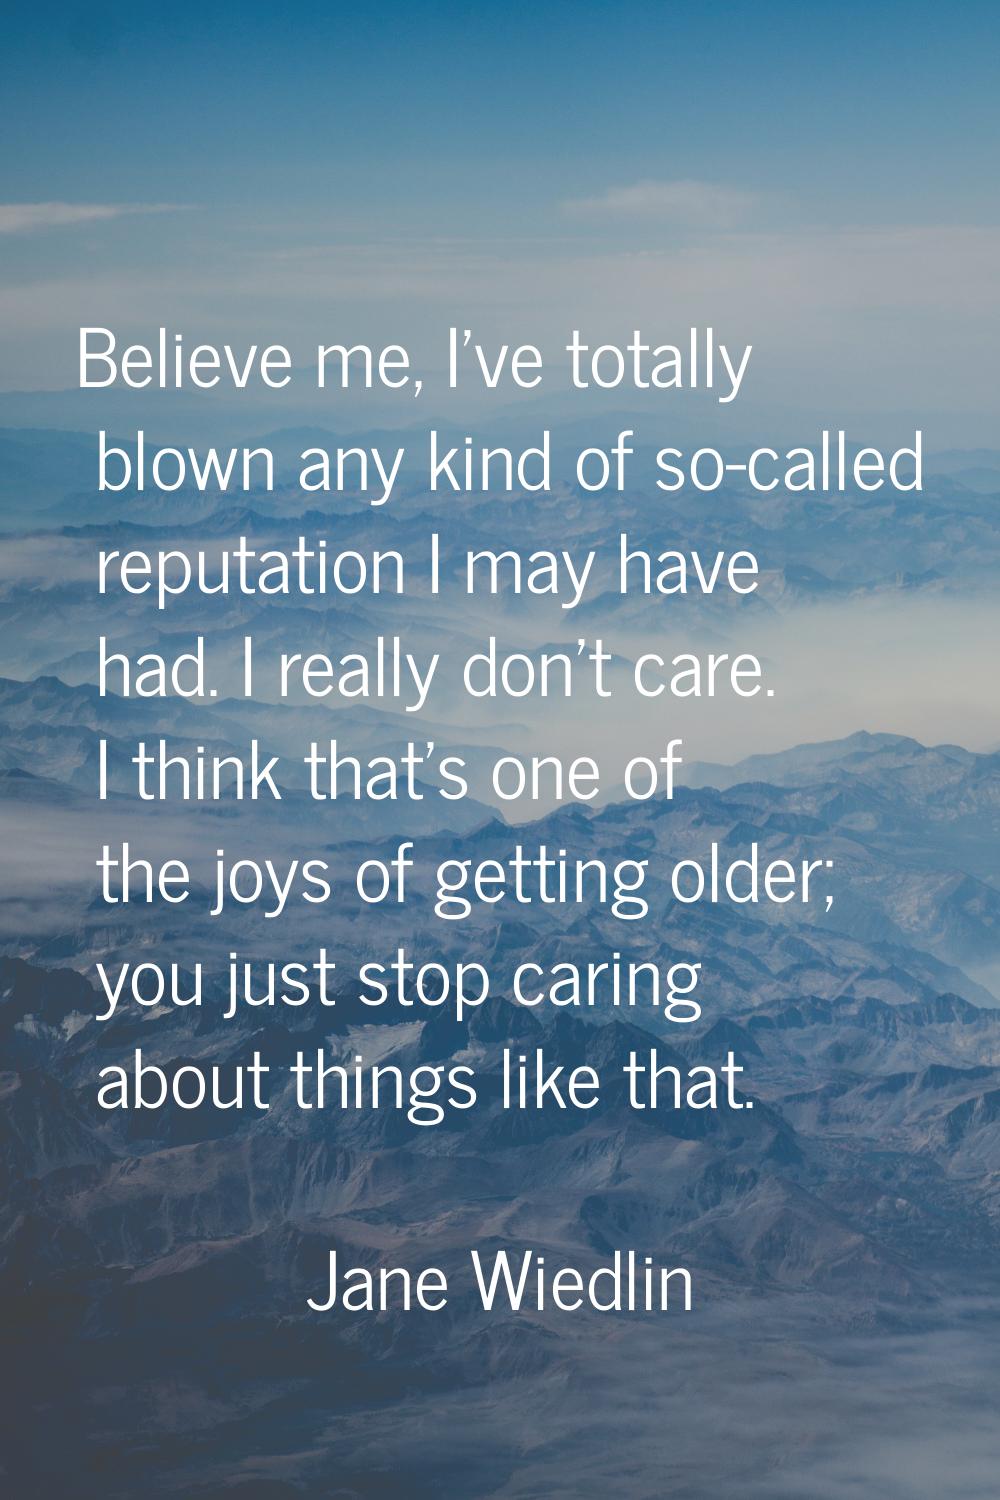 Believe me, I've totally blown any kind of so-called reputation I may have had. I really don't care